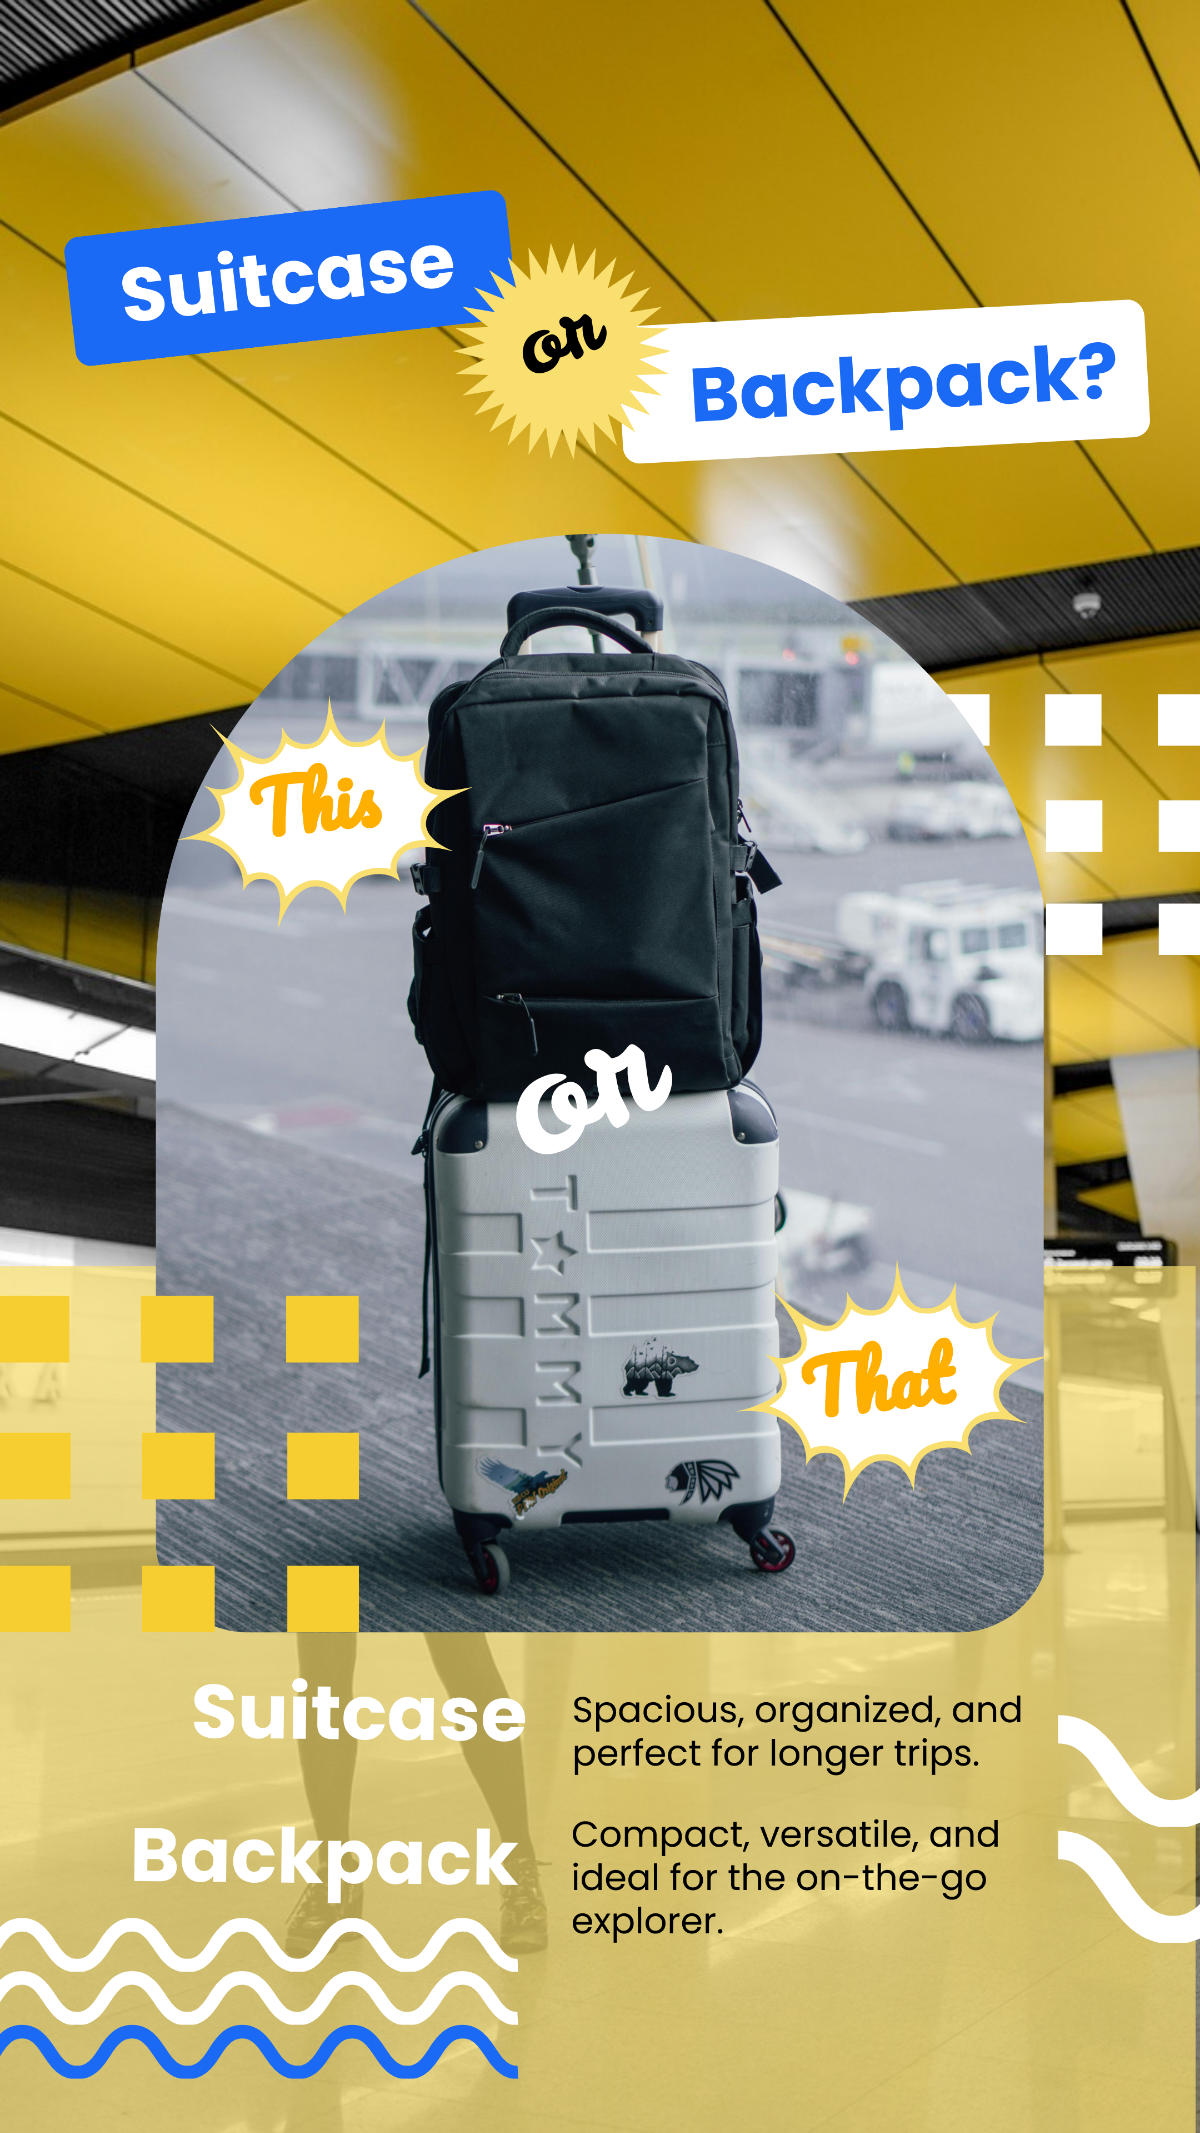 Free Suitcase or Backpack This or That Story Template